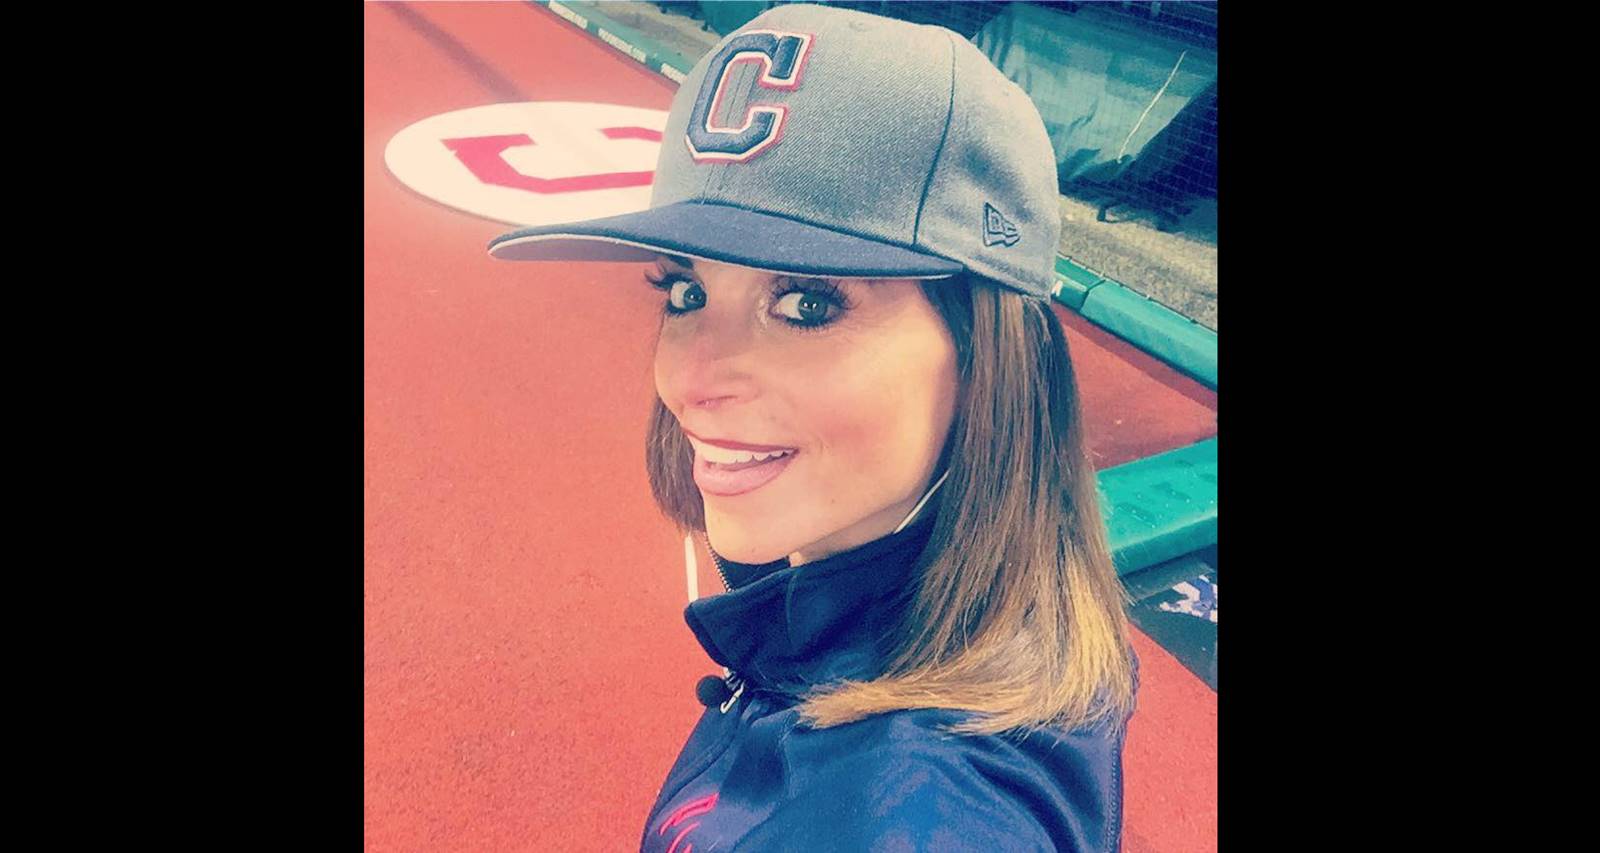 Hollie-Strano-Wiki-Age-Family-Kids-Parents-Husbands-Education-and-Facts-About-the-WKYC-TV-Meteorologist.jpg